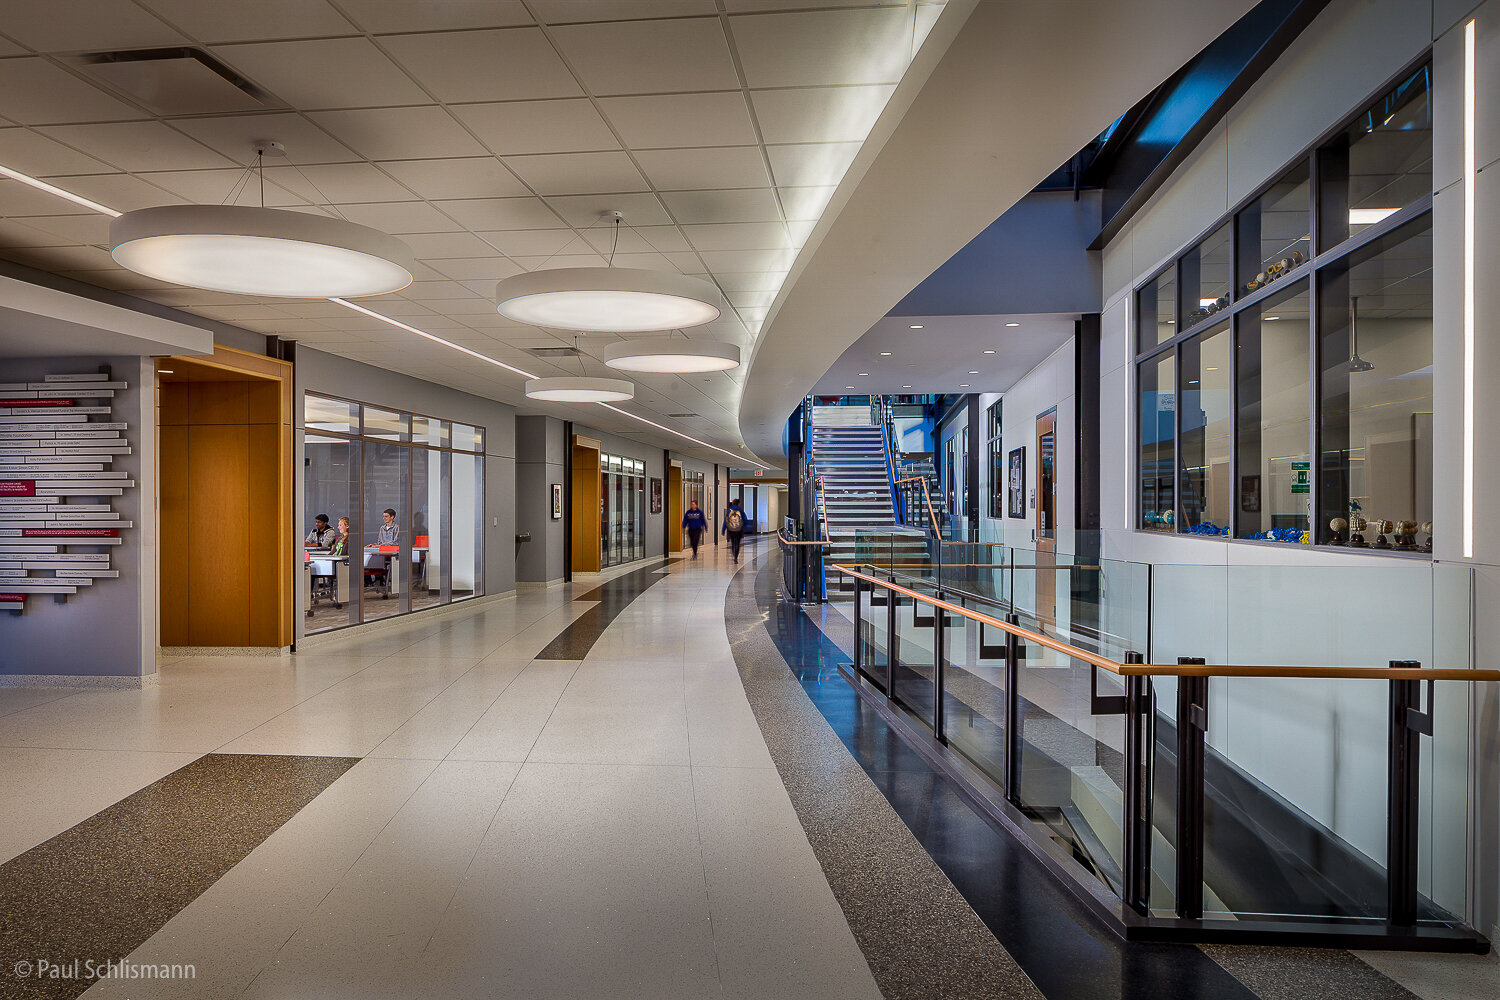 Interior lobby of St Mary’s college MN. by Chicago architectural photographer Paul Schlismann